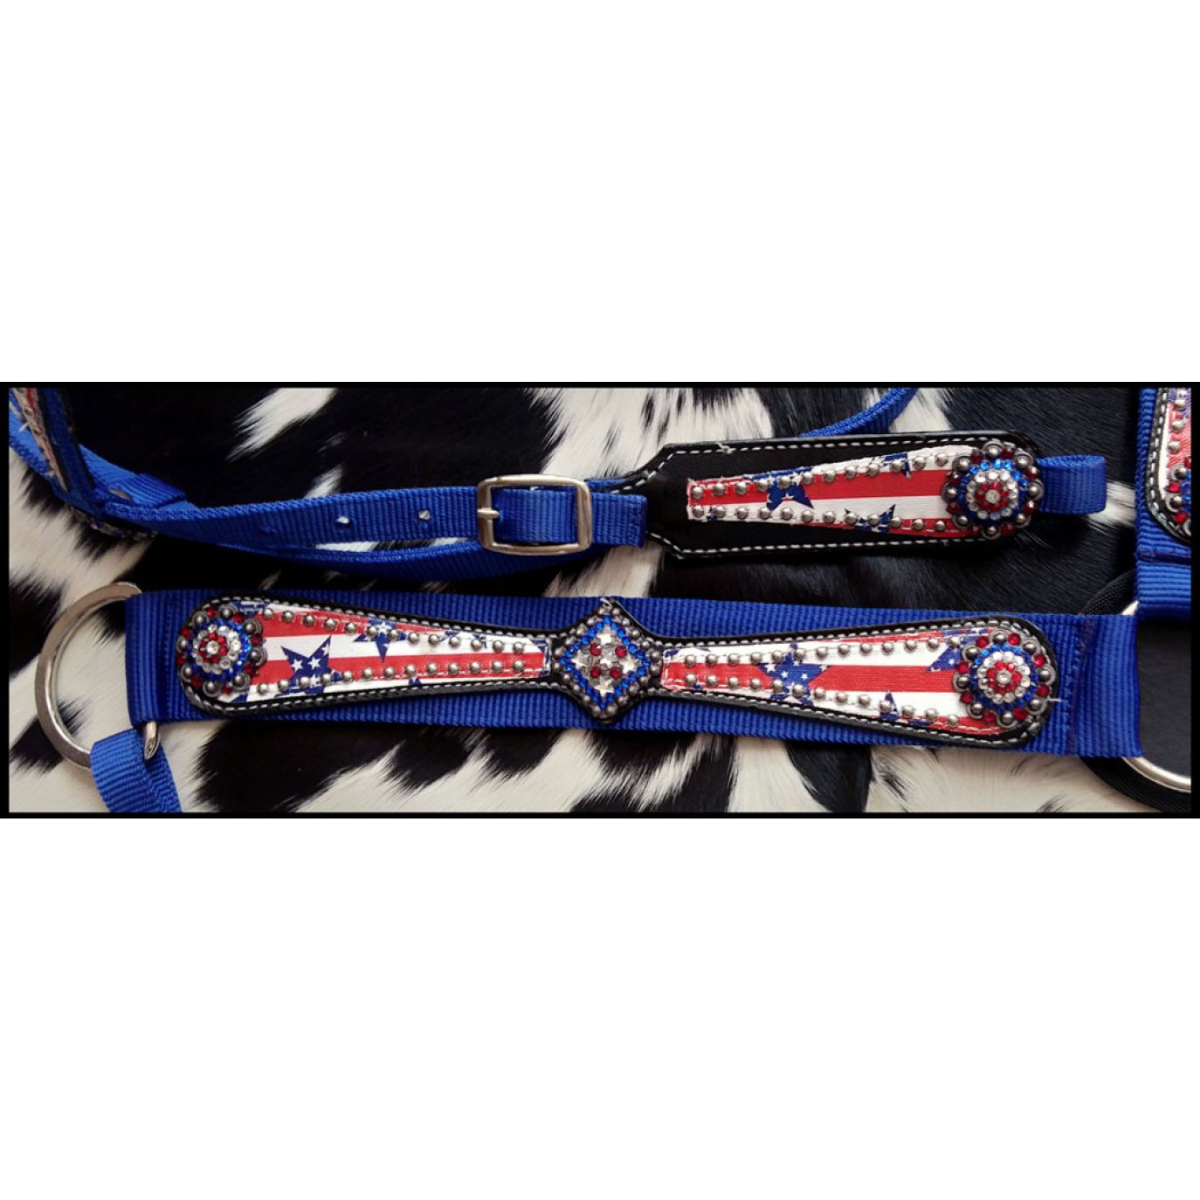 Showman ® Horse size nylon headstall and breast collar set with stars and stripes print overlay. - Double T Saddles